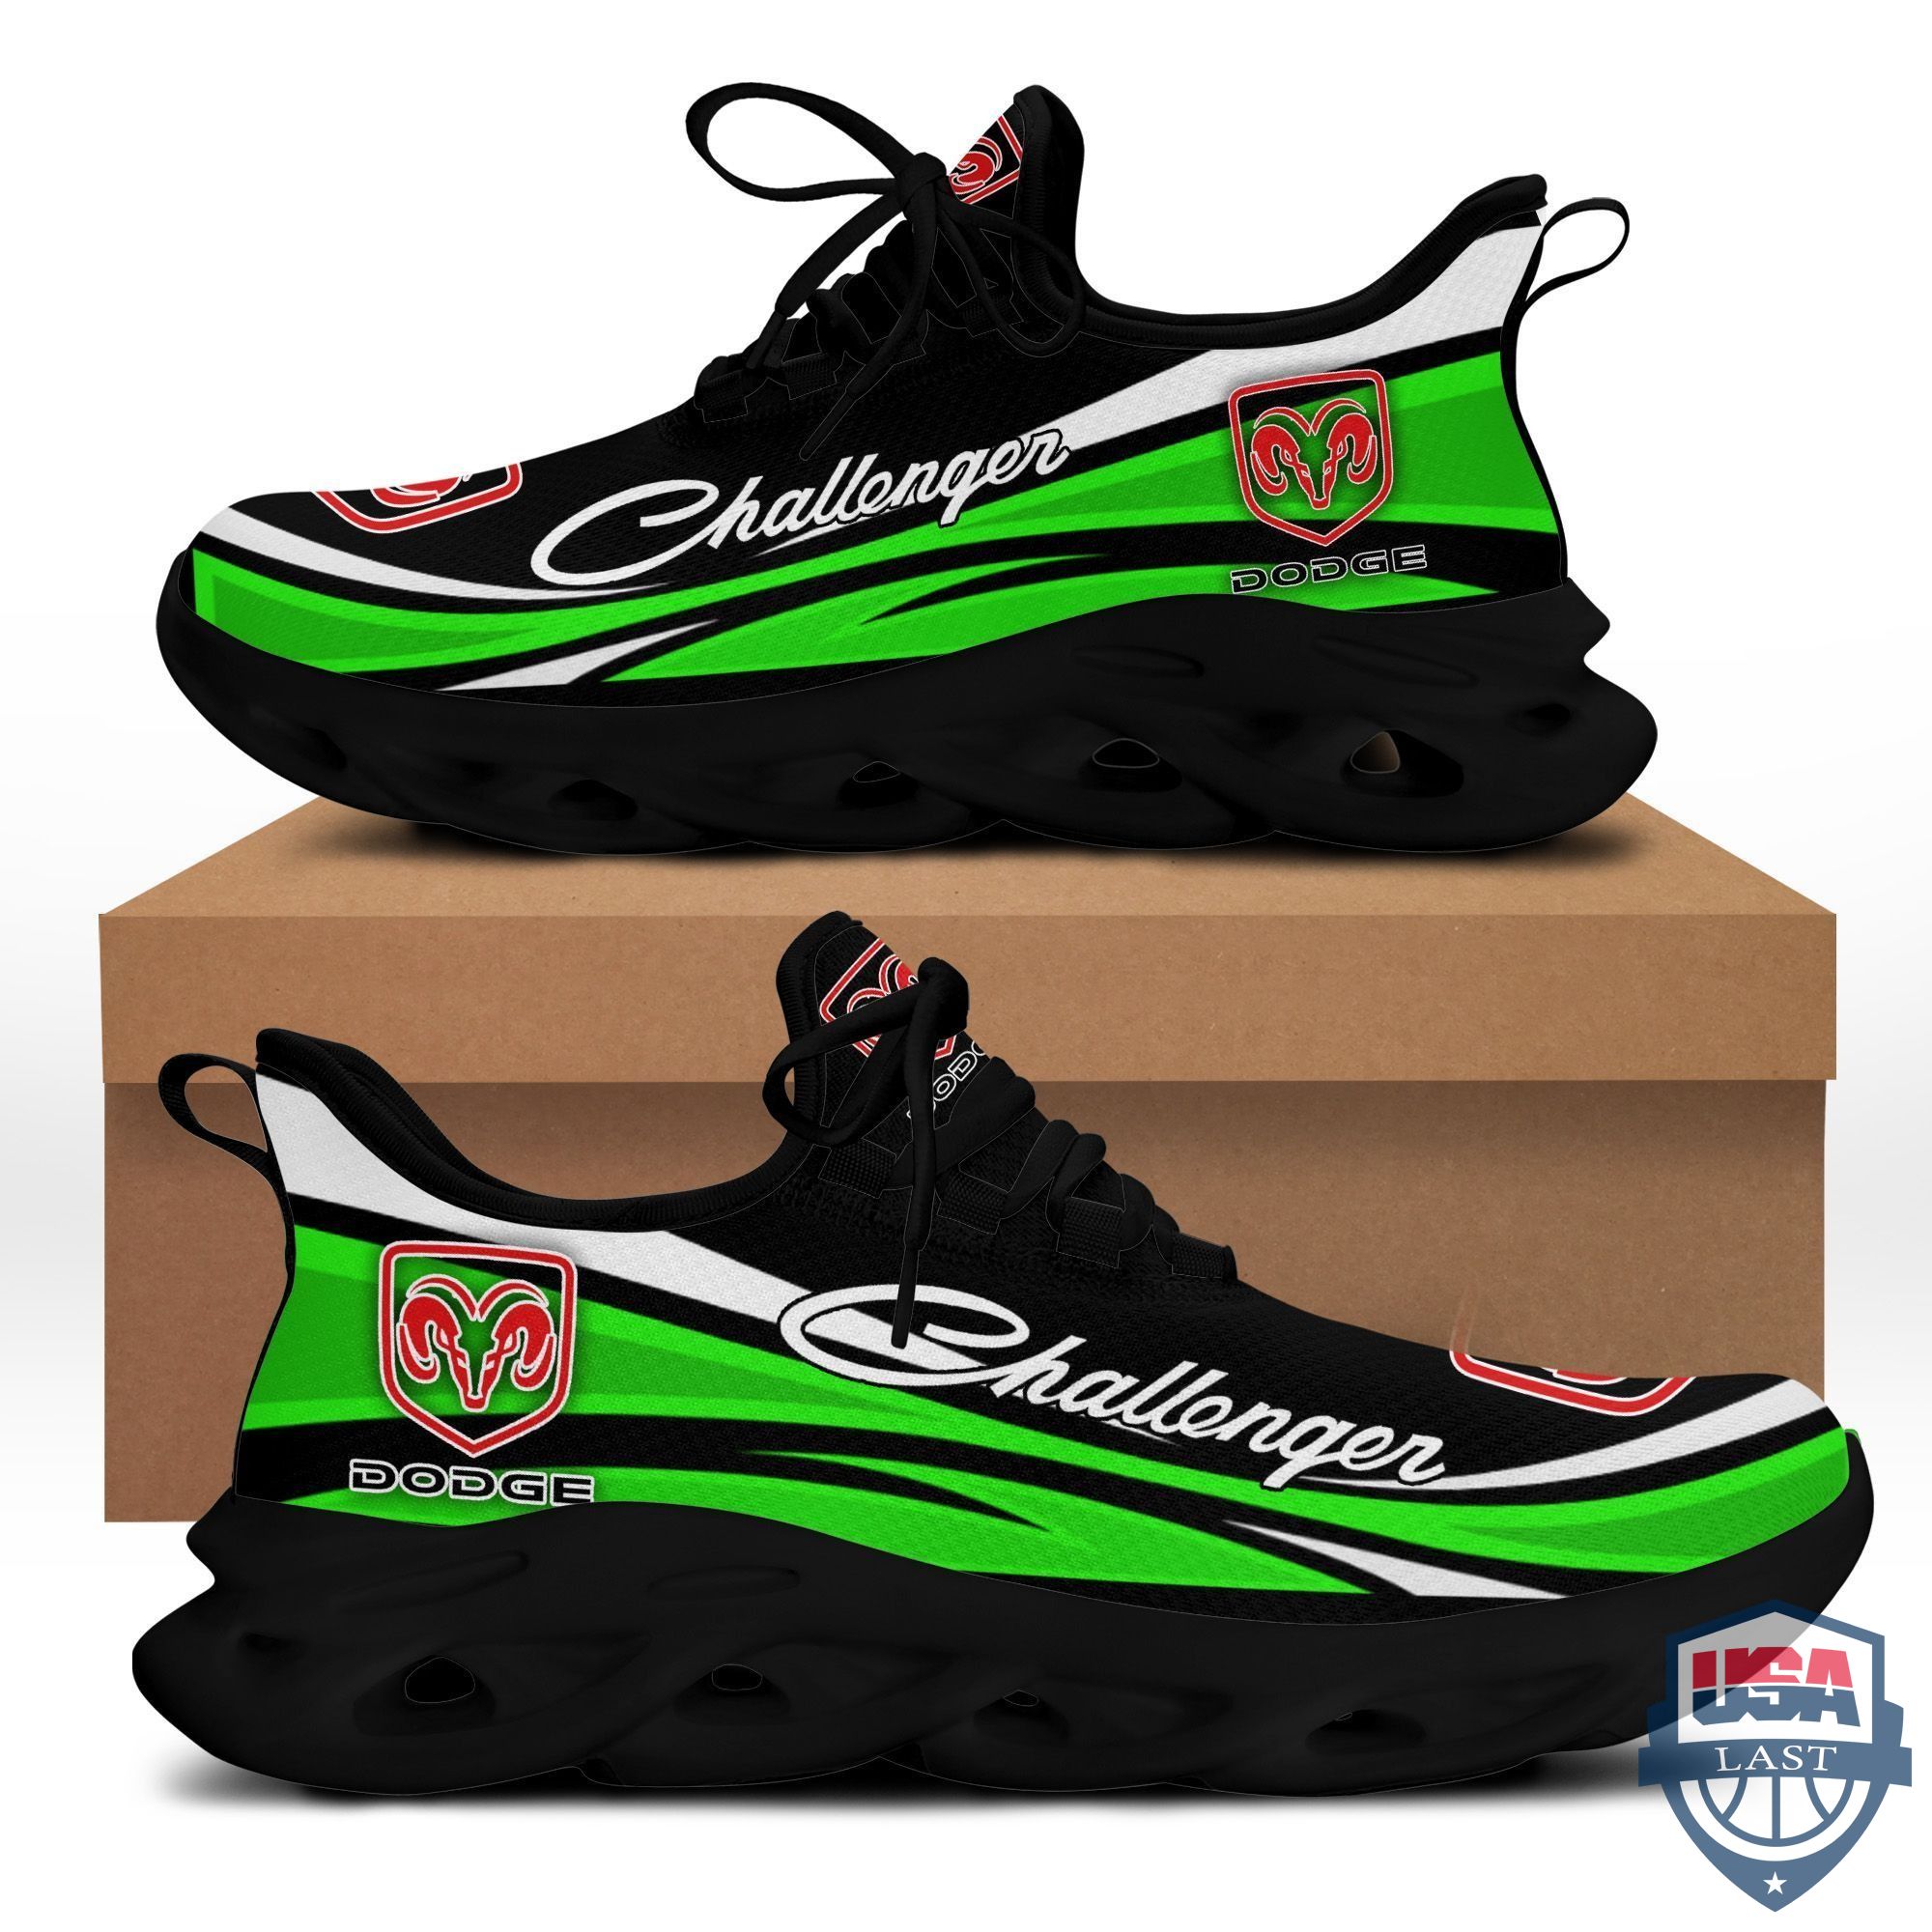 ULhojyly-T110122-127xxxDodge-Challenger-Max-Soul-Shoes-Green-Version.jpg